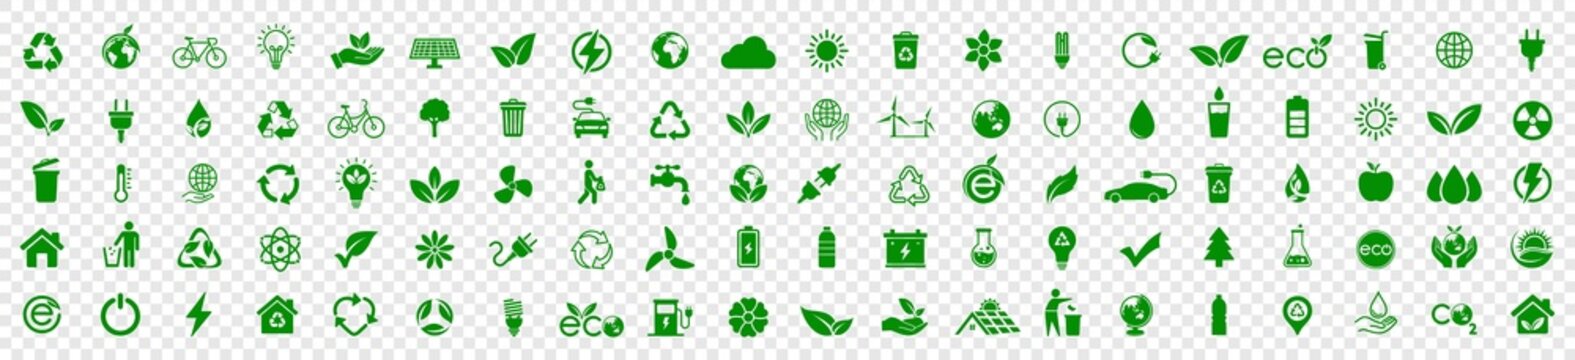 Ecology icon set. Eco green friendly icon, nature green icons set on transparent background. Vector illustration